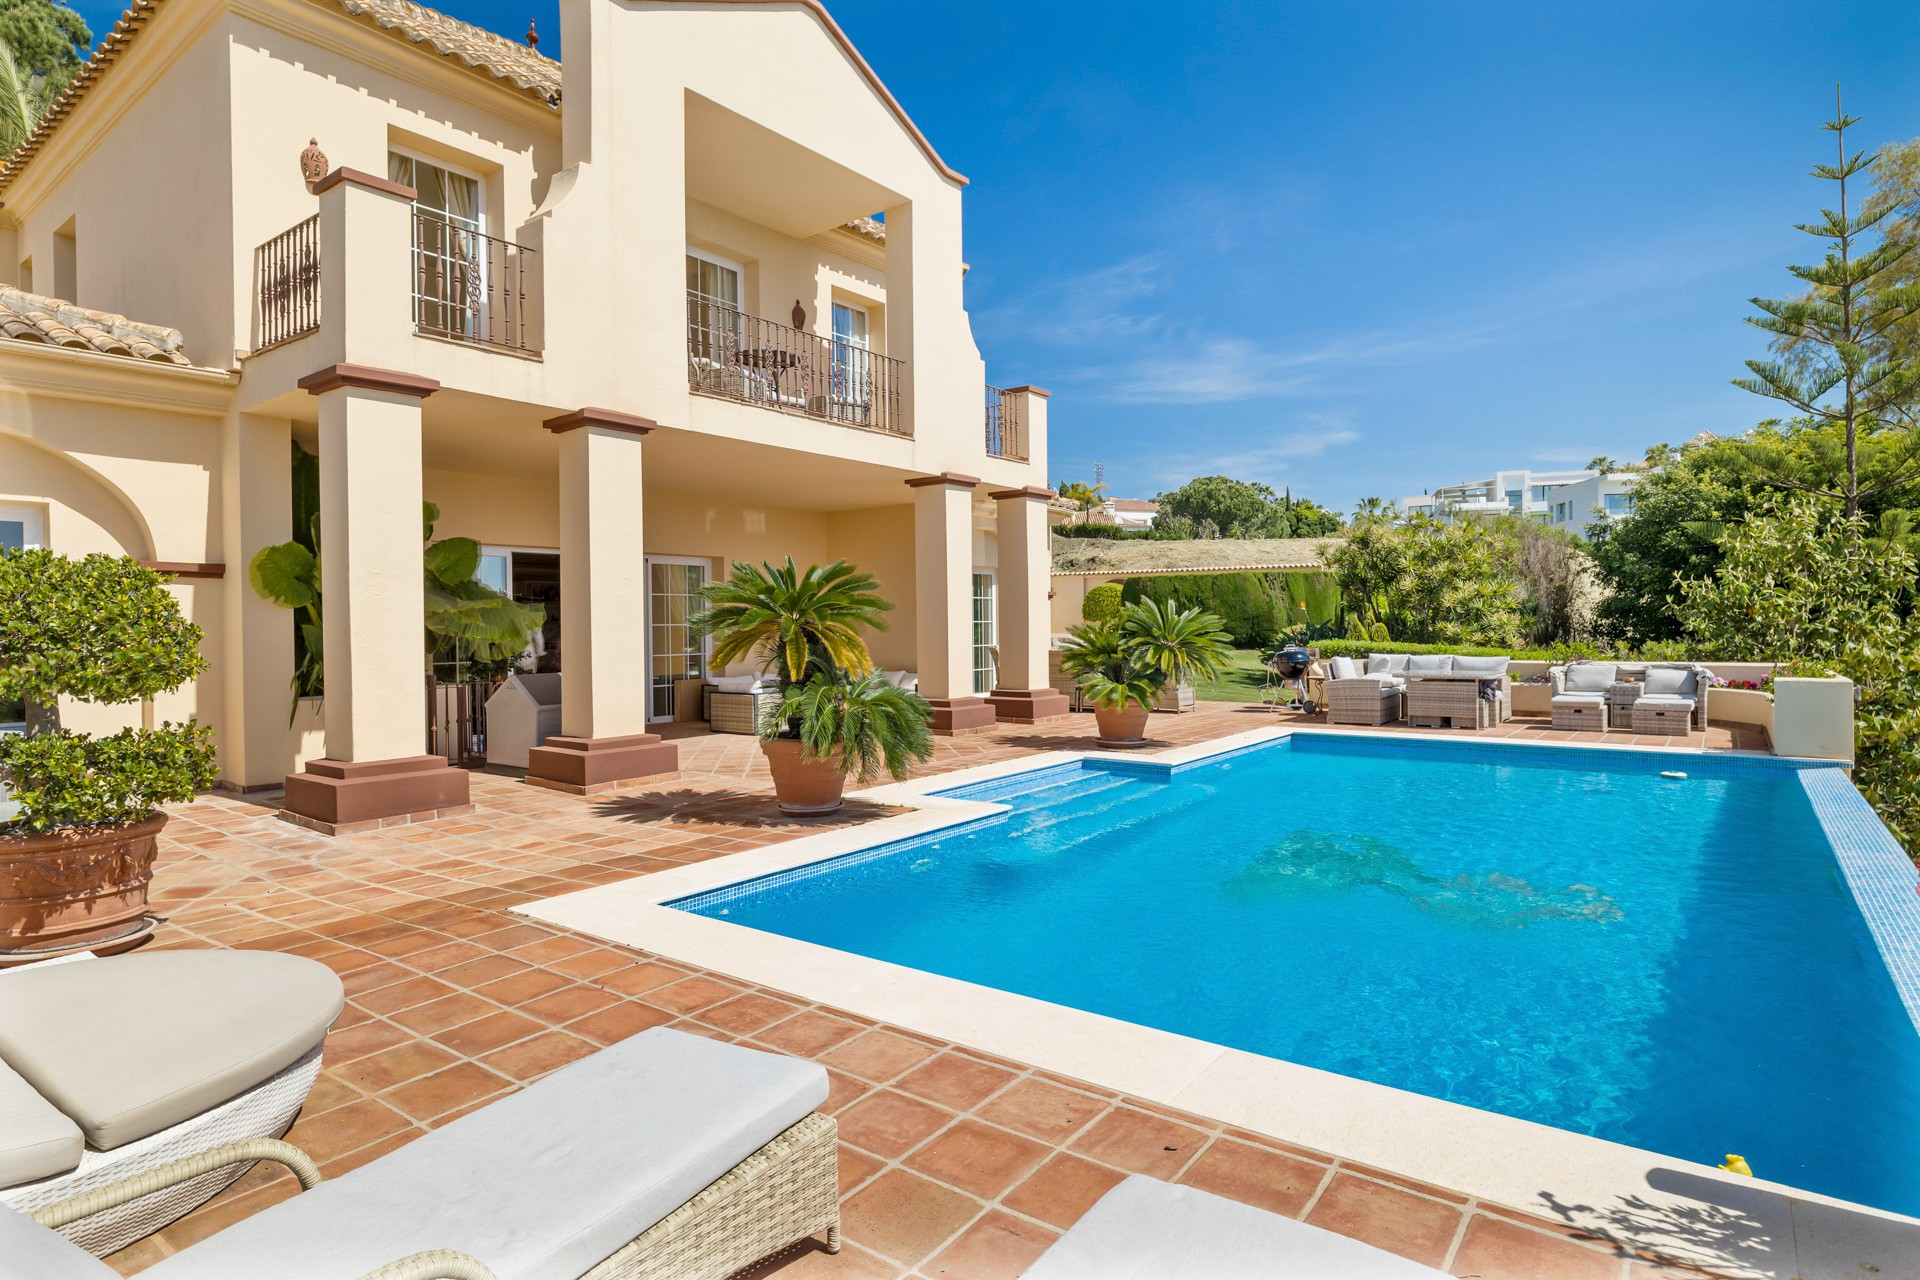 Classical style villa in El Paraiso Alto, fully private with sea and mountain views, close to all amenities and golf